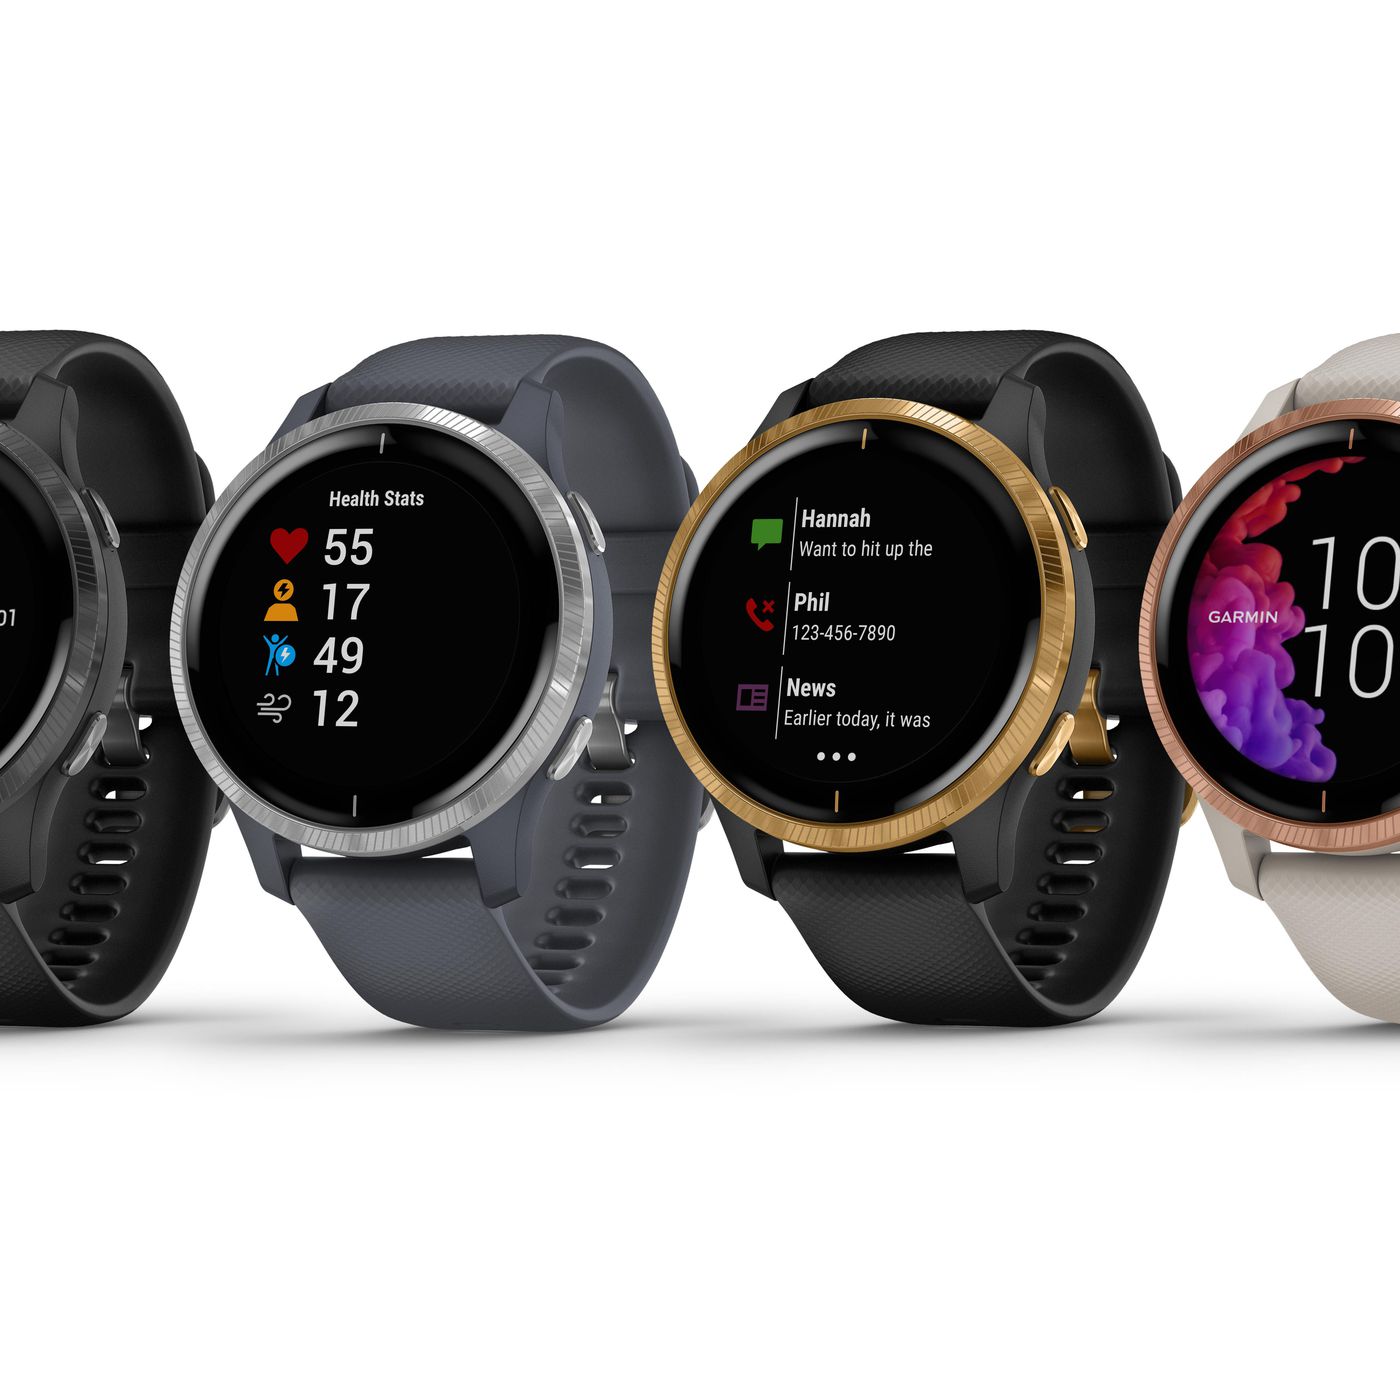 Garmin's new Venu sports watch with OLED display prioritizes gyms 